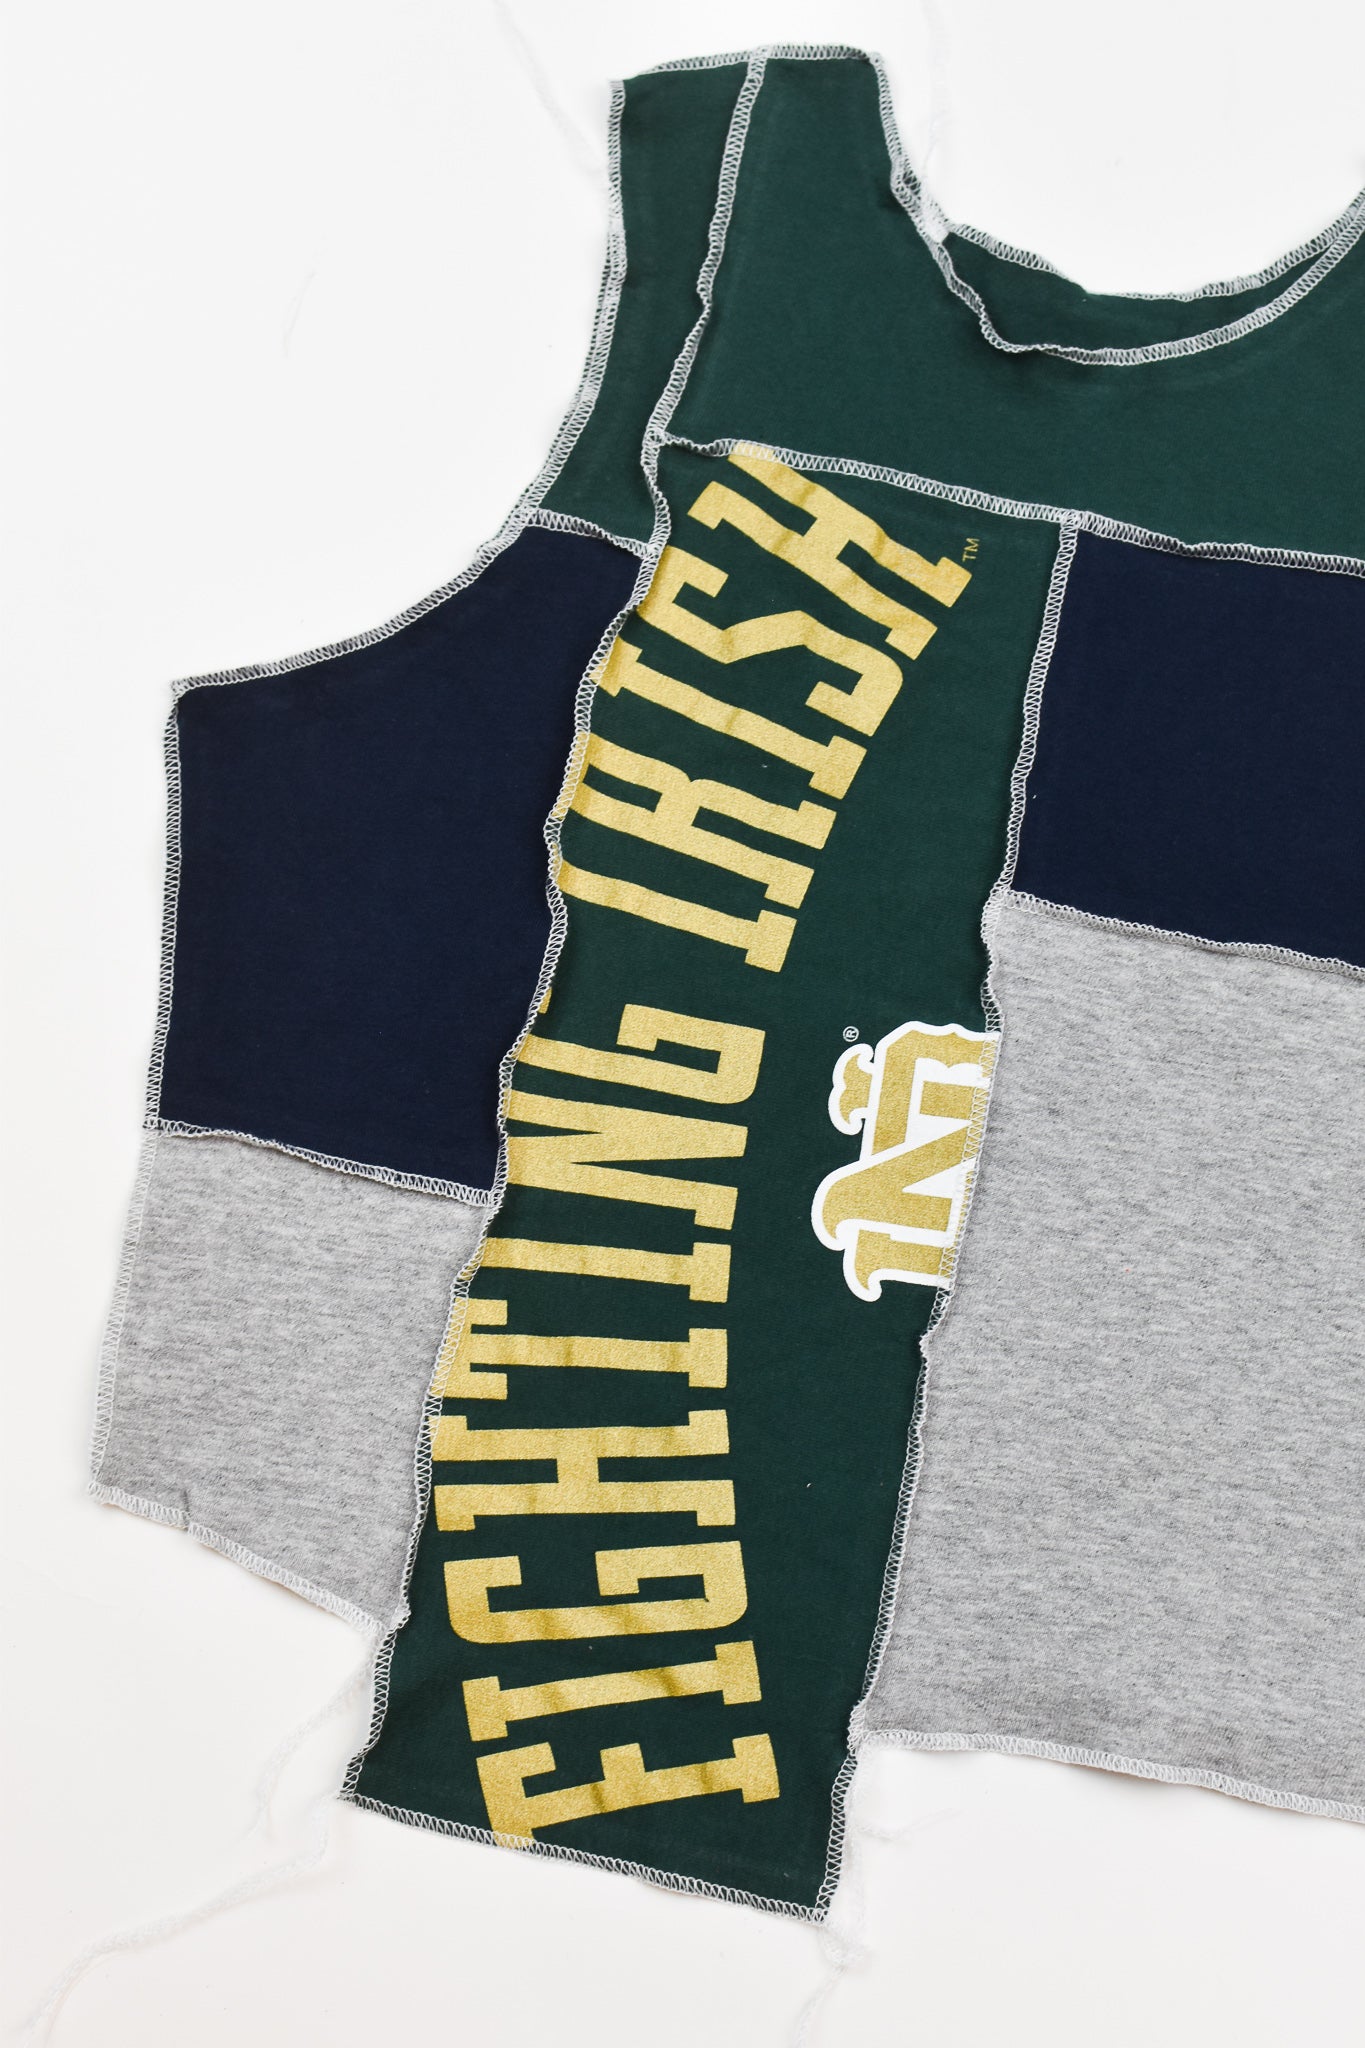 Upcycled Notre Dame Scrappy Tank Top